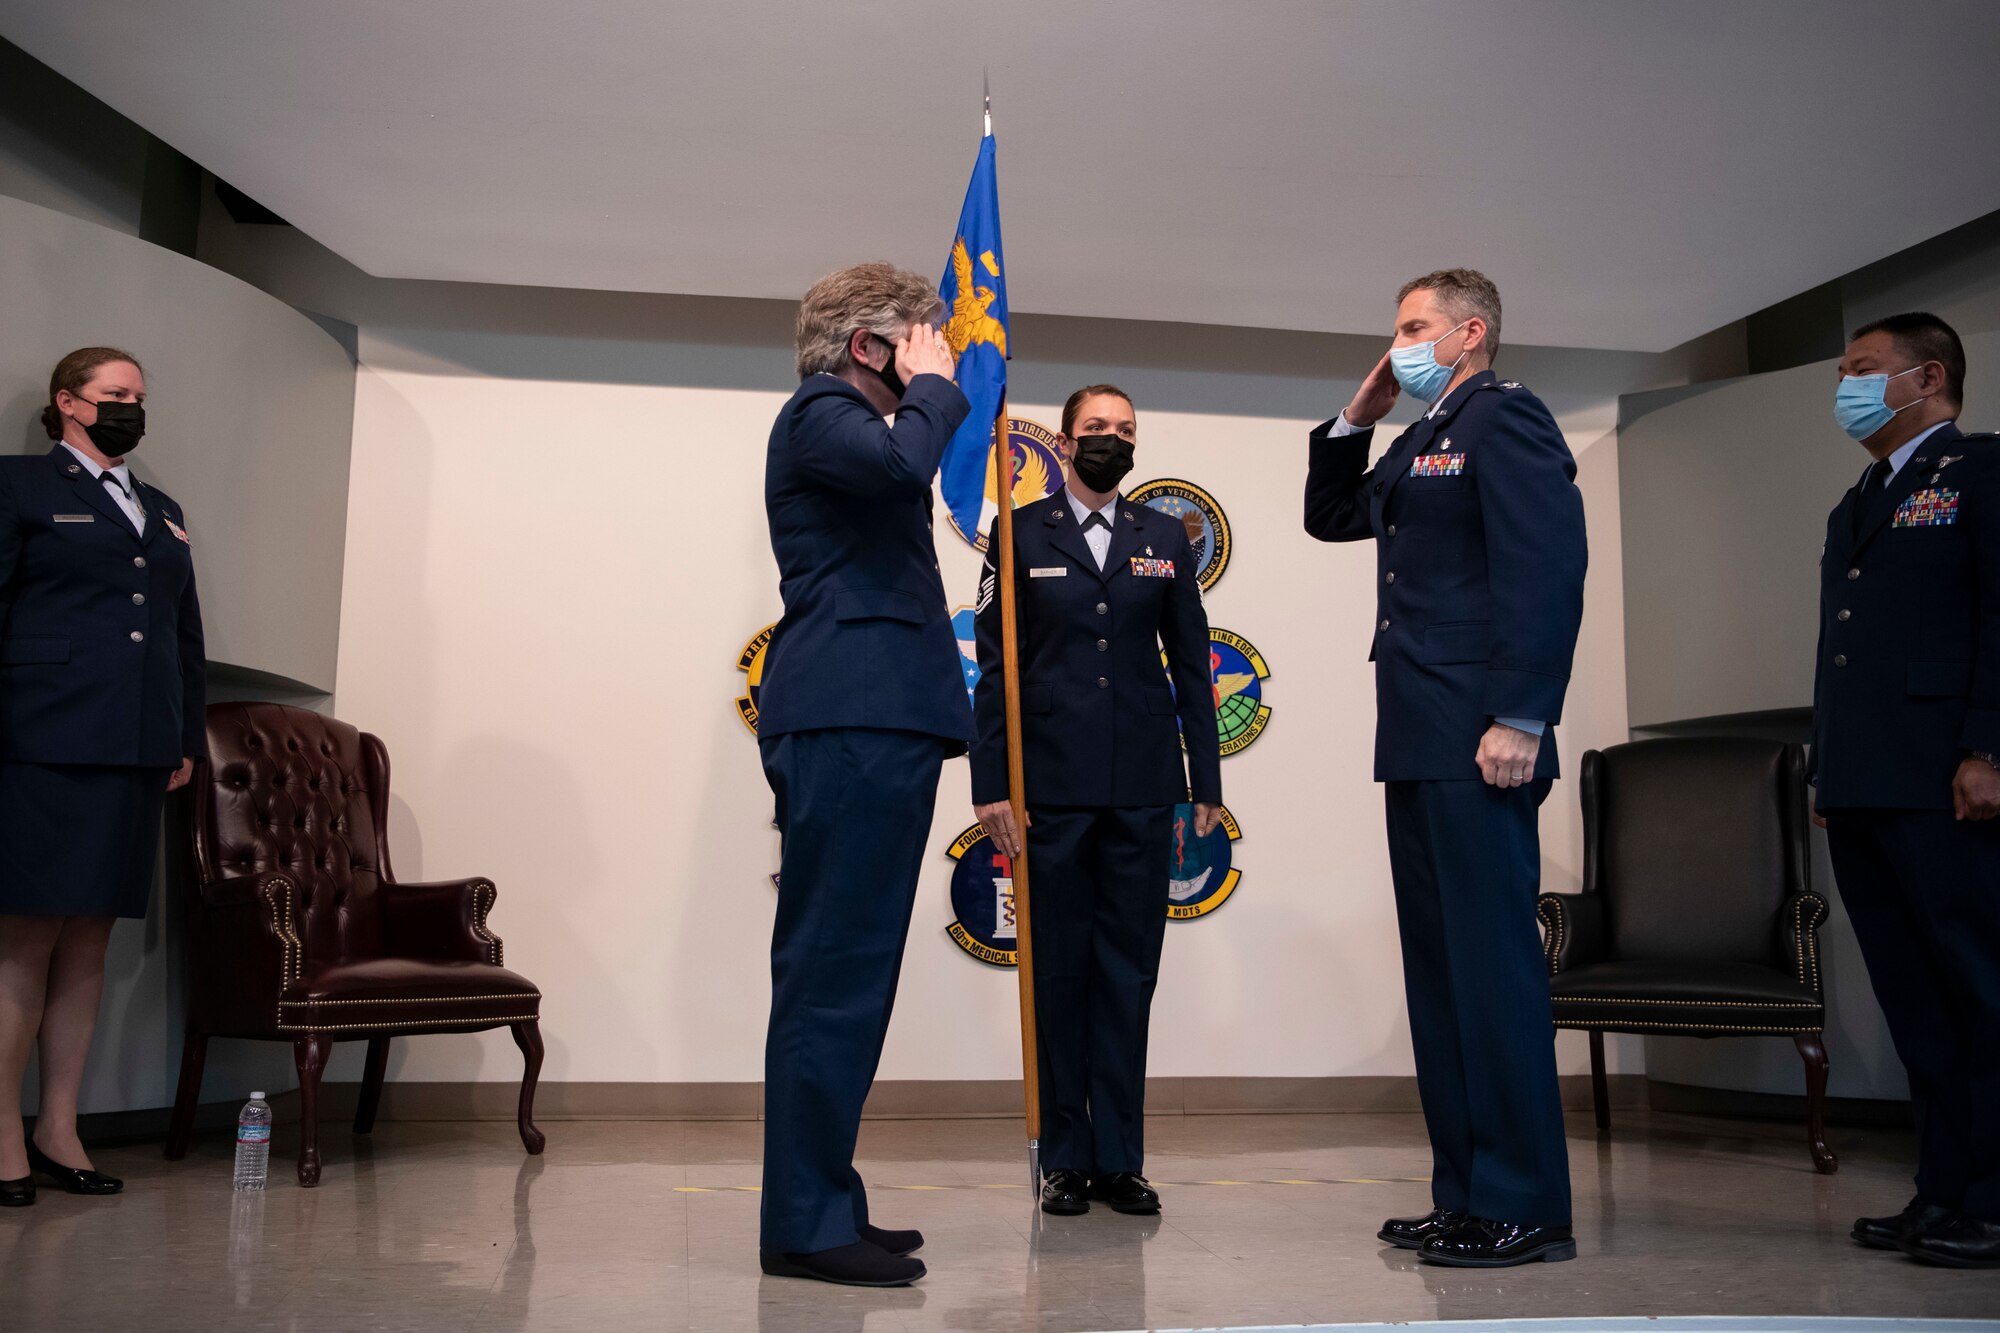 Change of Command Ceremony for the 349th Aeromedical Staging Squadron